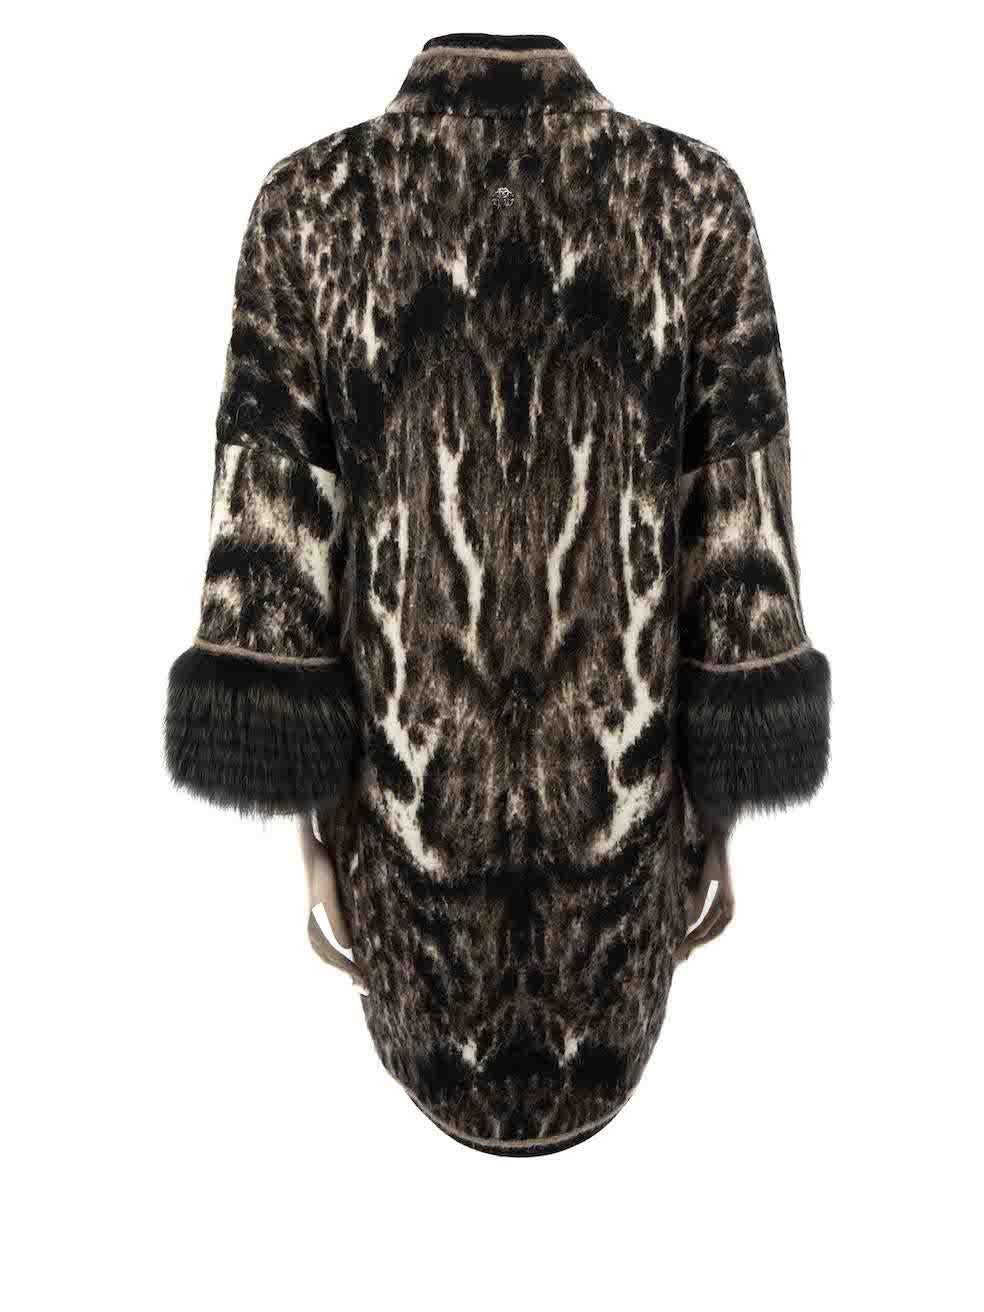 Roberto Cavalli Black Wool Abstract Pattern Coat Size M In Good Condition For Sale In London, GB